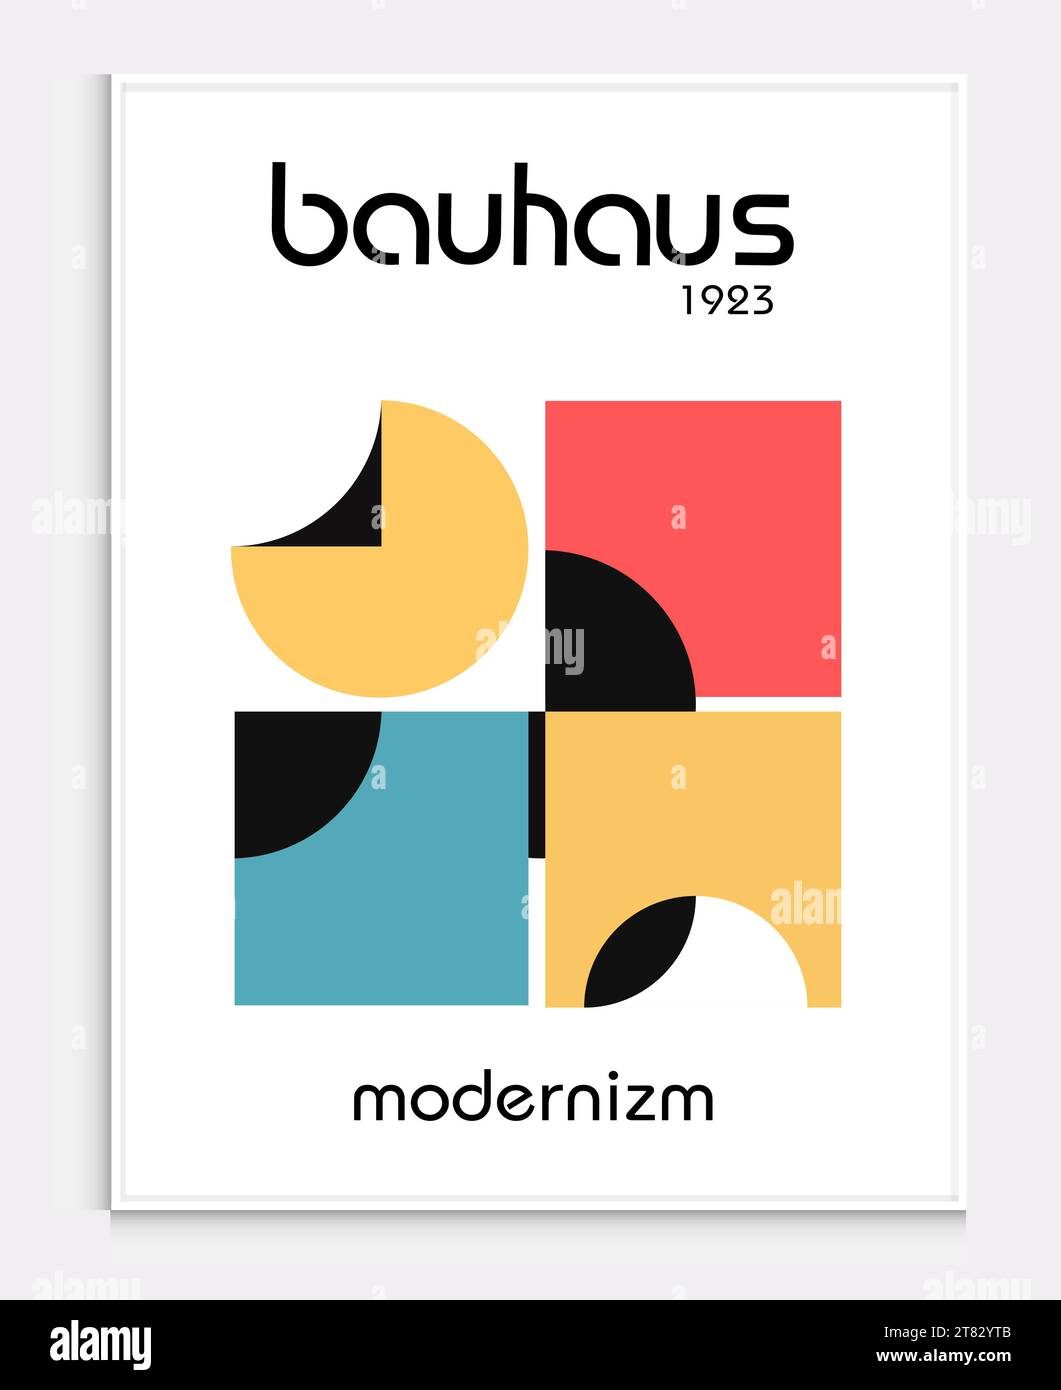 Contains Abstract Art Set in bauhaus style, Decorative Modern Art, Vector illustration poster. Prints, Gallery Wall Art Set, Office Wall Art, Stock Vector